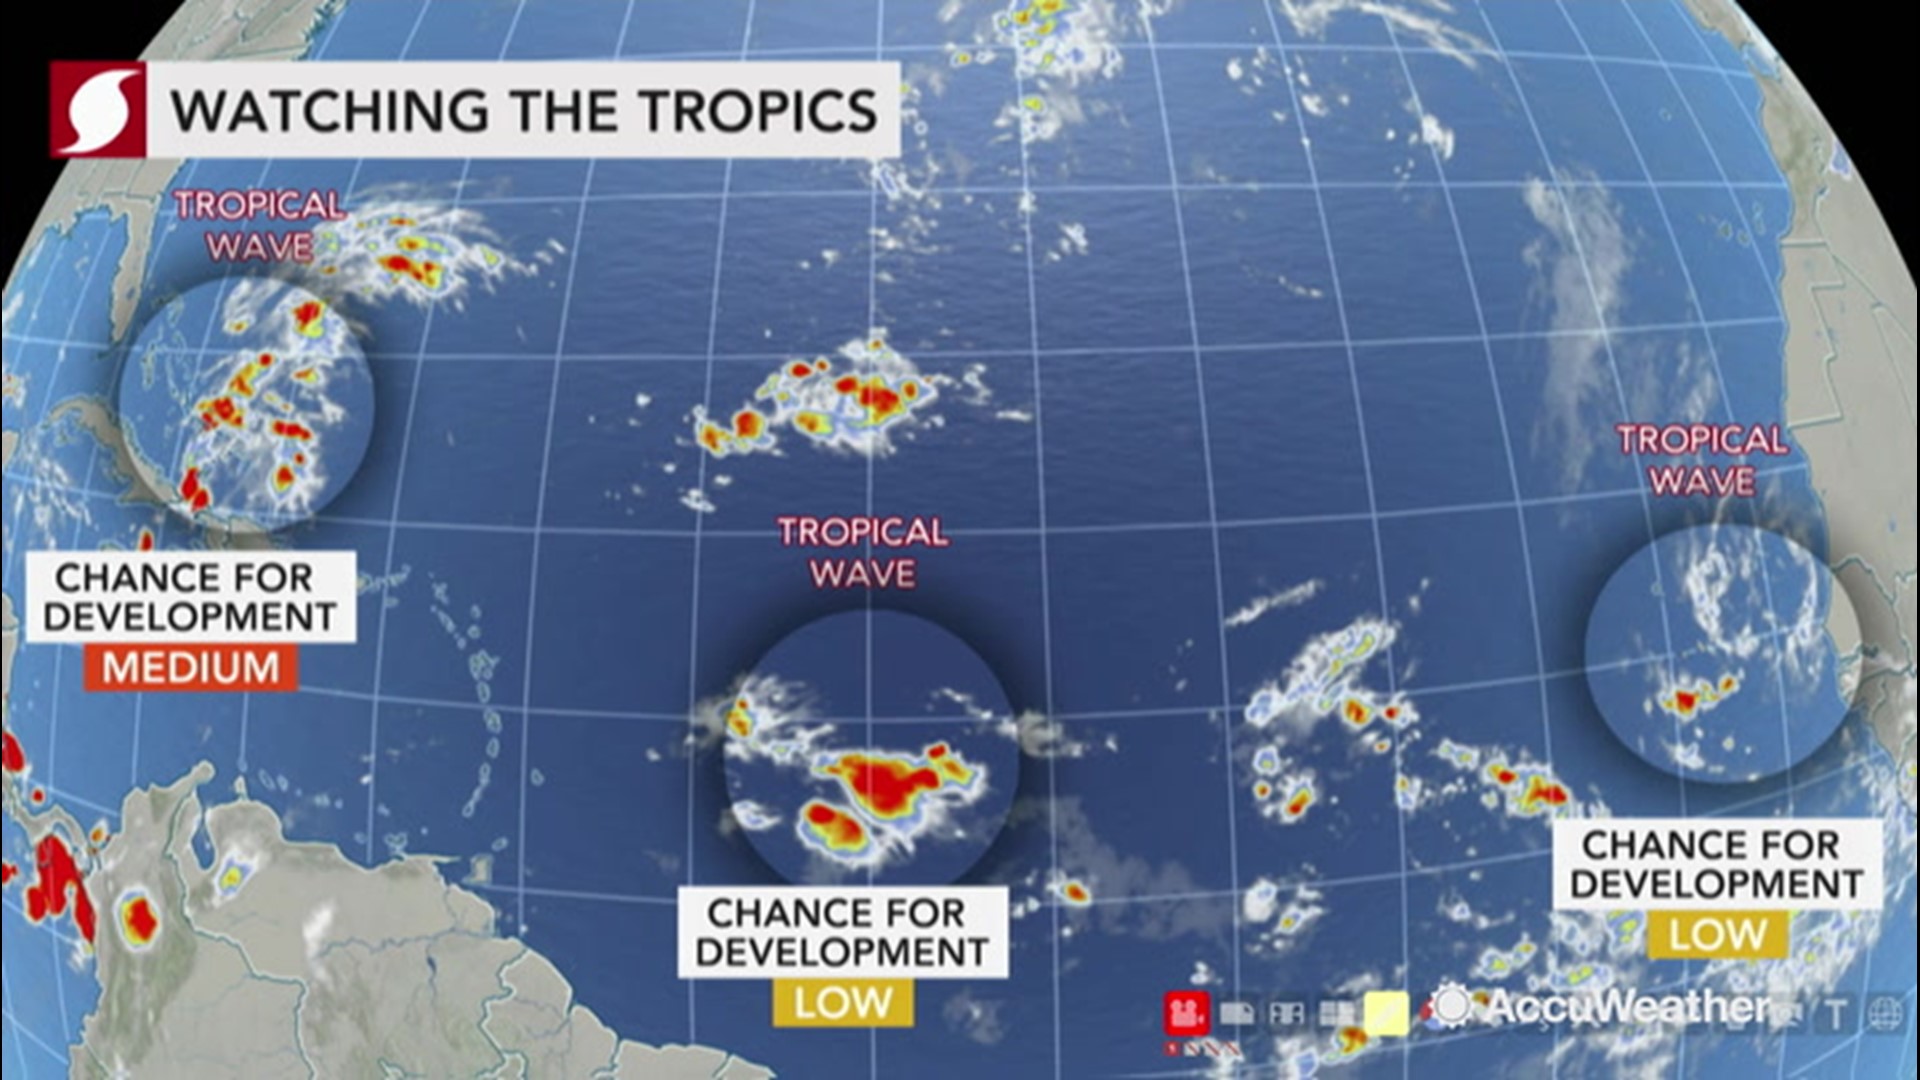 AccuWeather Chief Video Meteorologist Bernie Rayno has an update on where the next tropical depression or storm could form in the Atlantic.